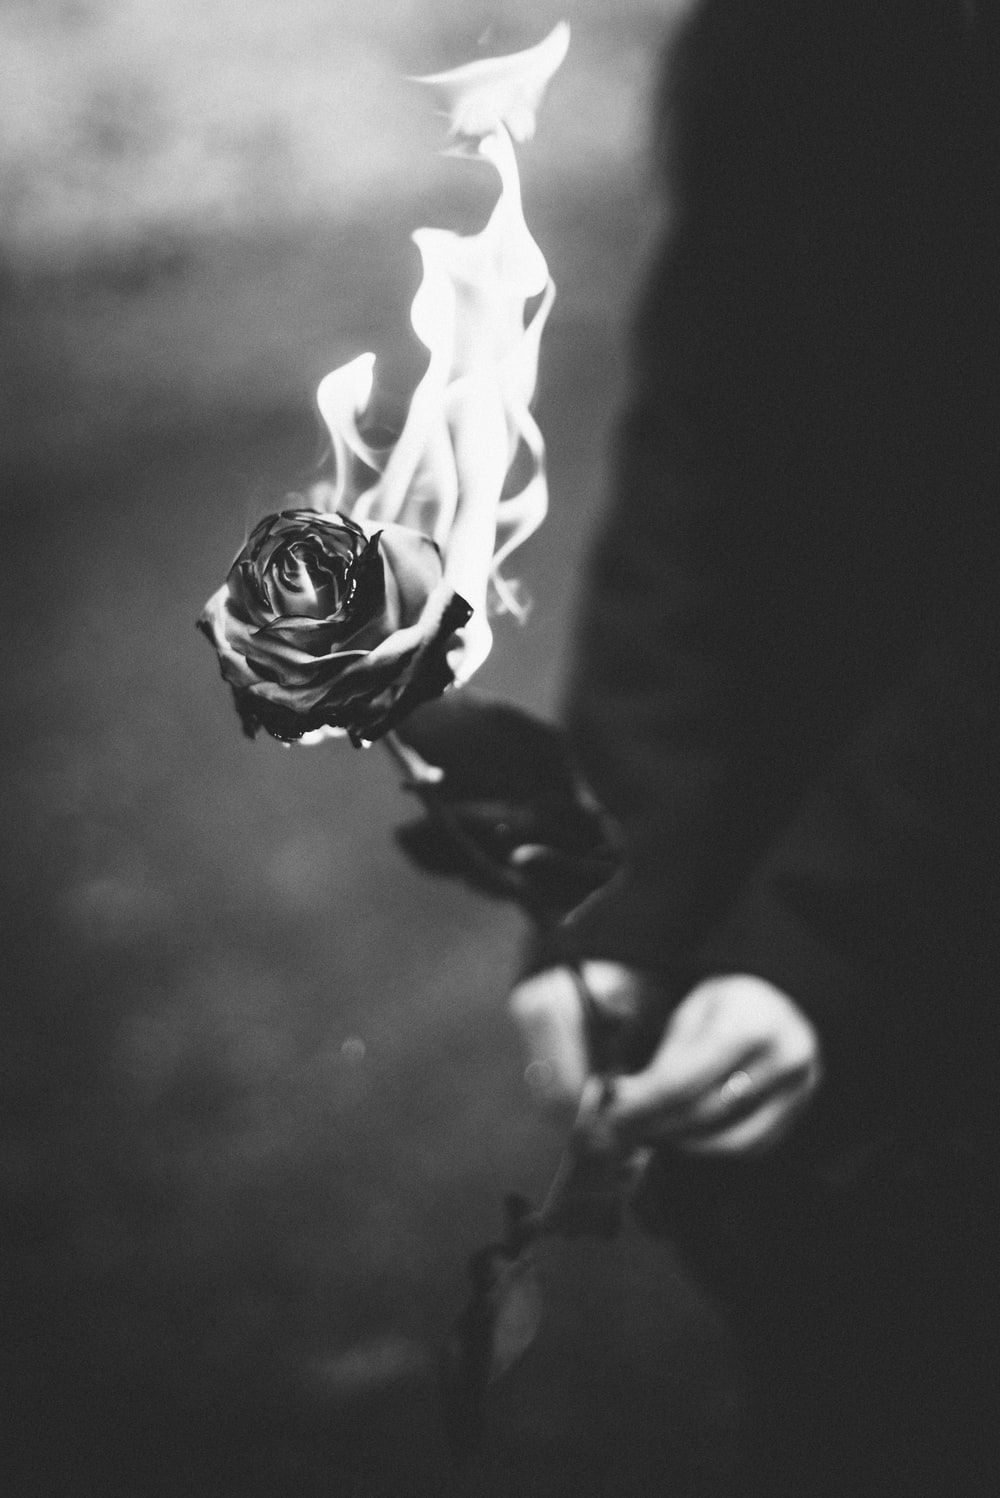 Fire Rose Picture. Download Free Image